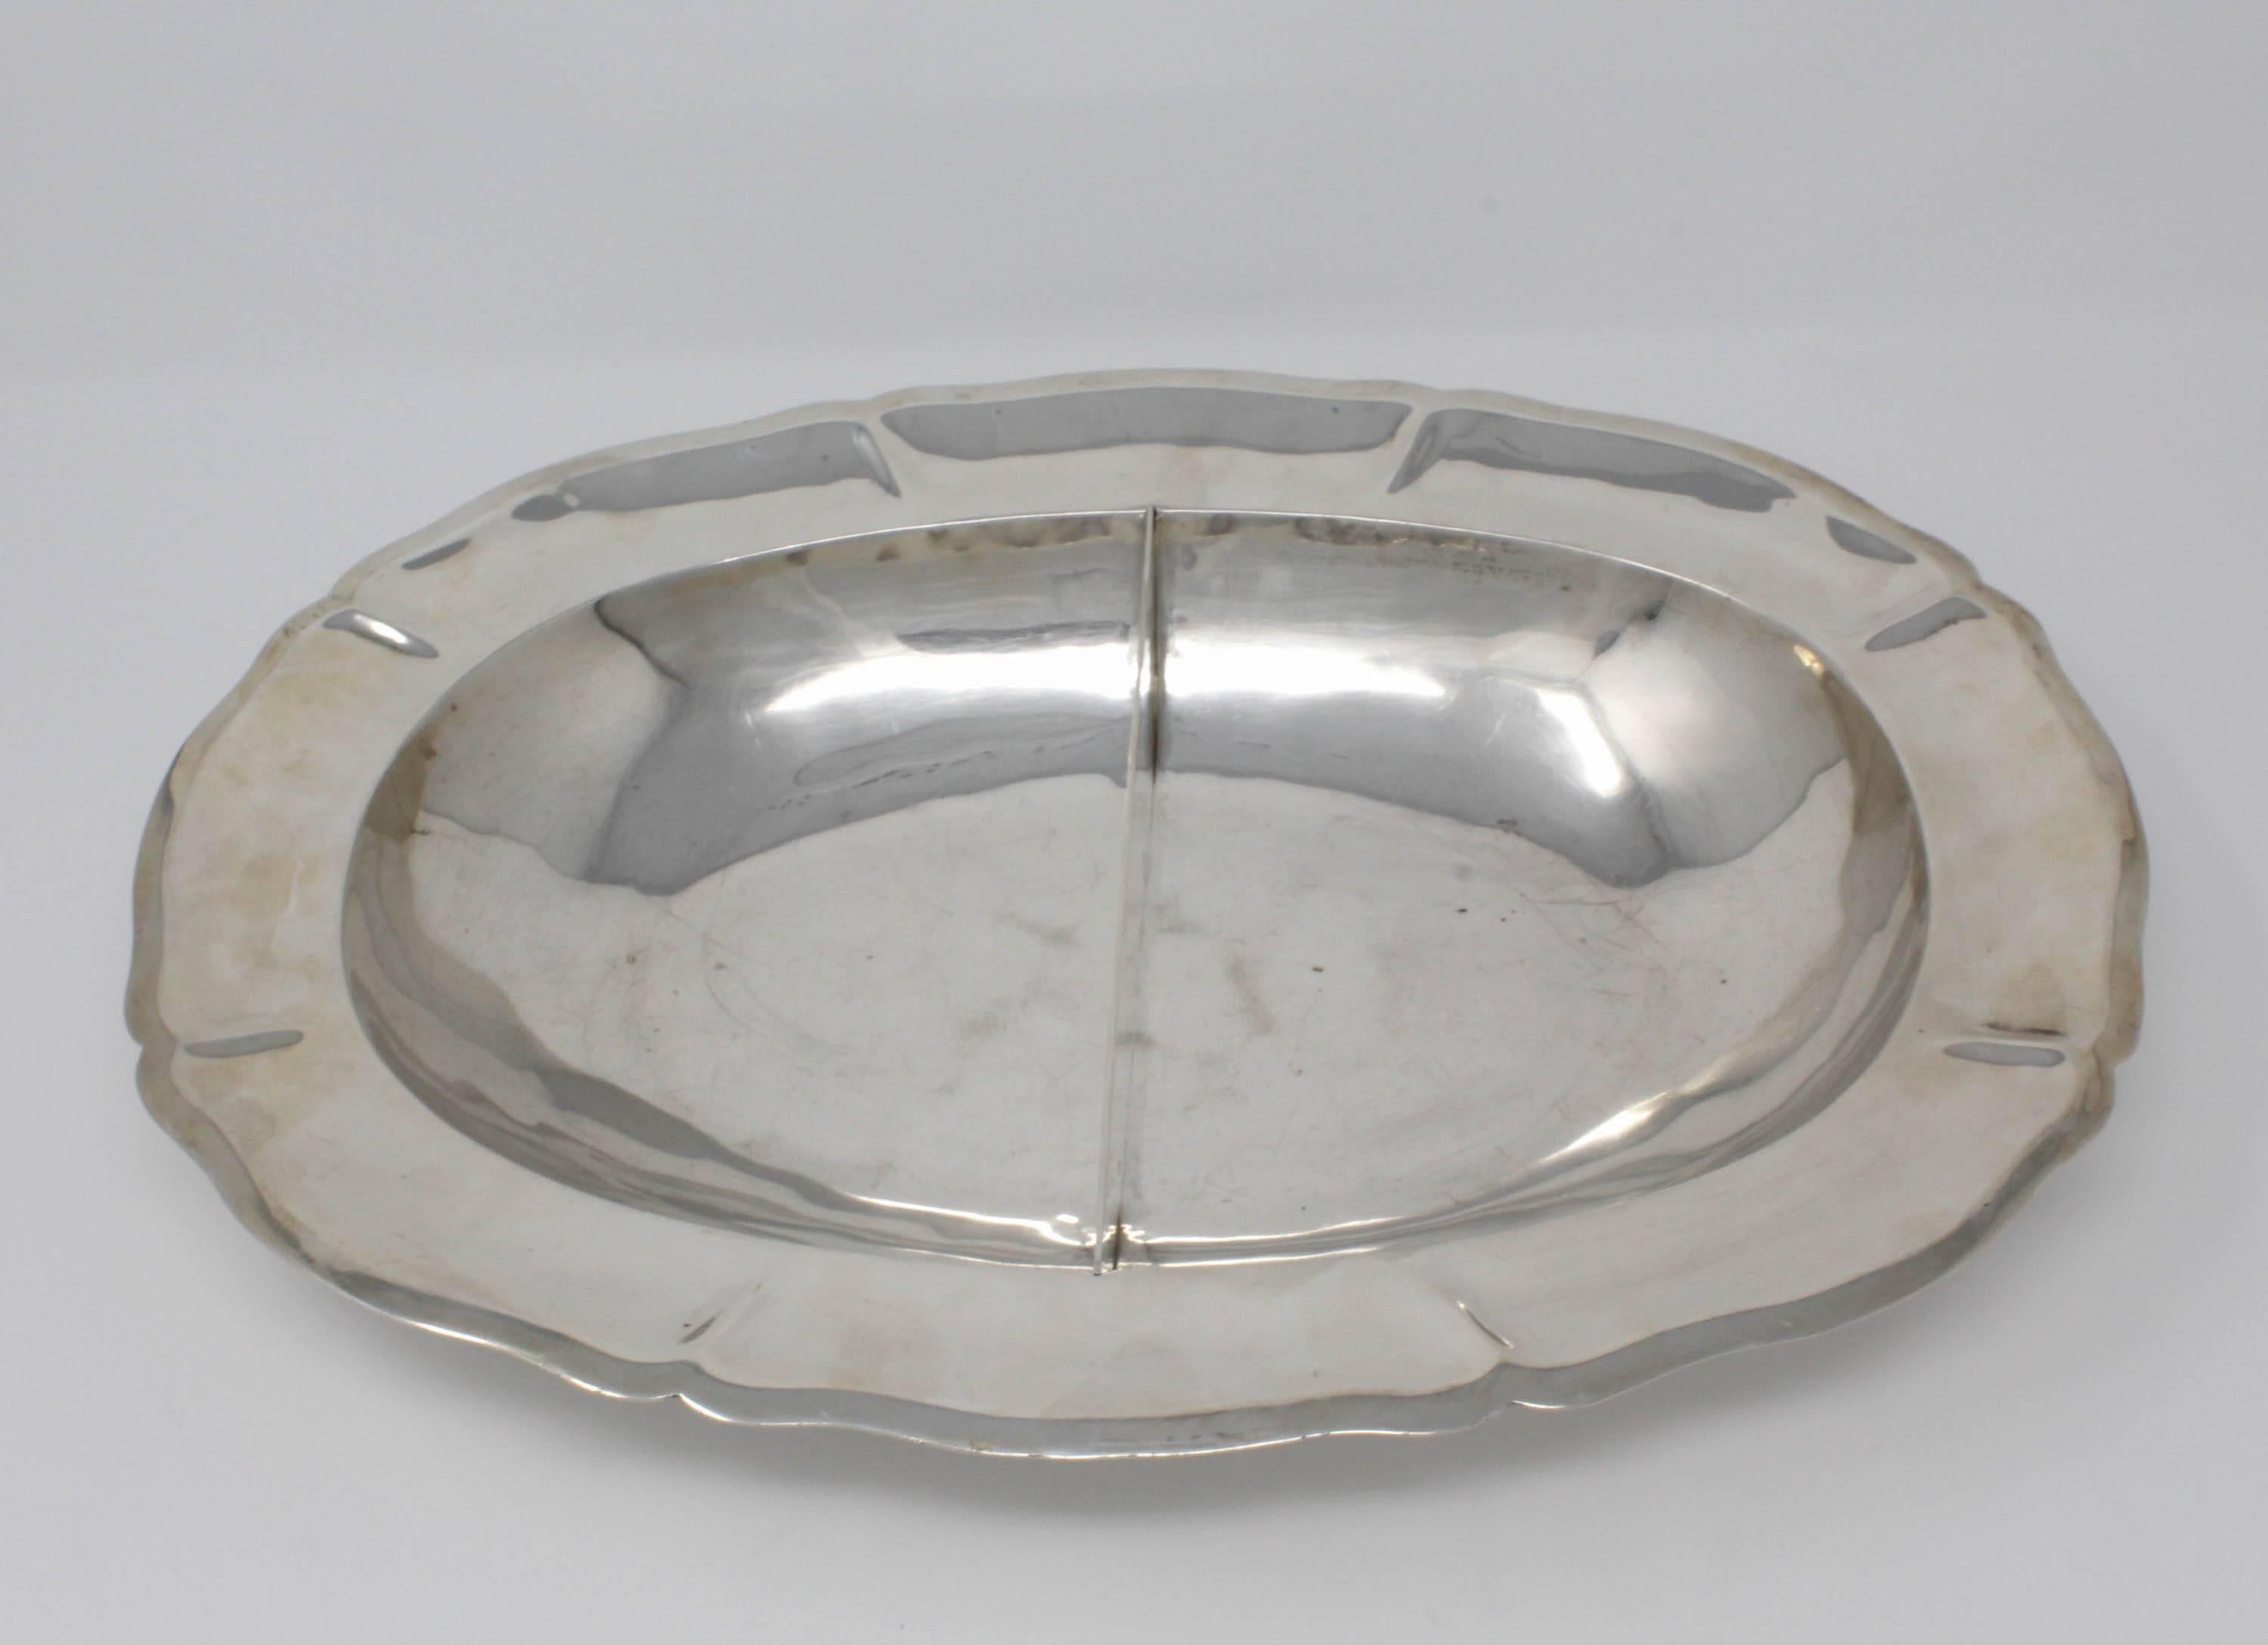 SS Oval Divided Dish, Maciel, c.1950.
Divider is removable.